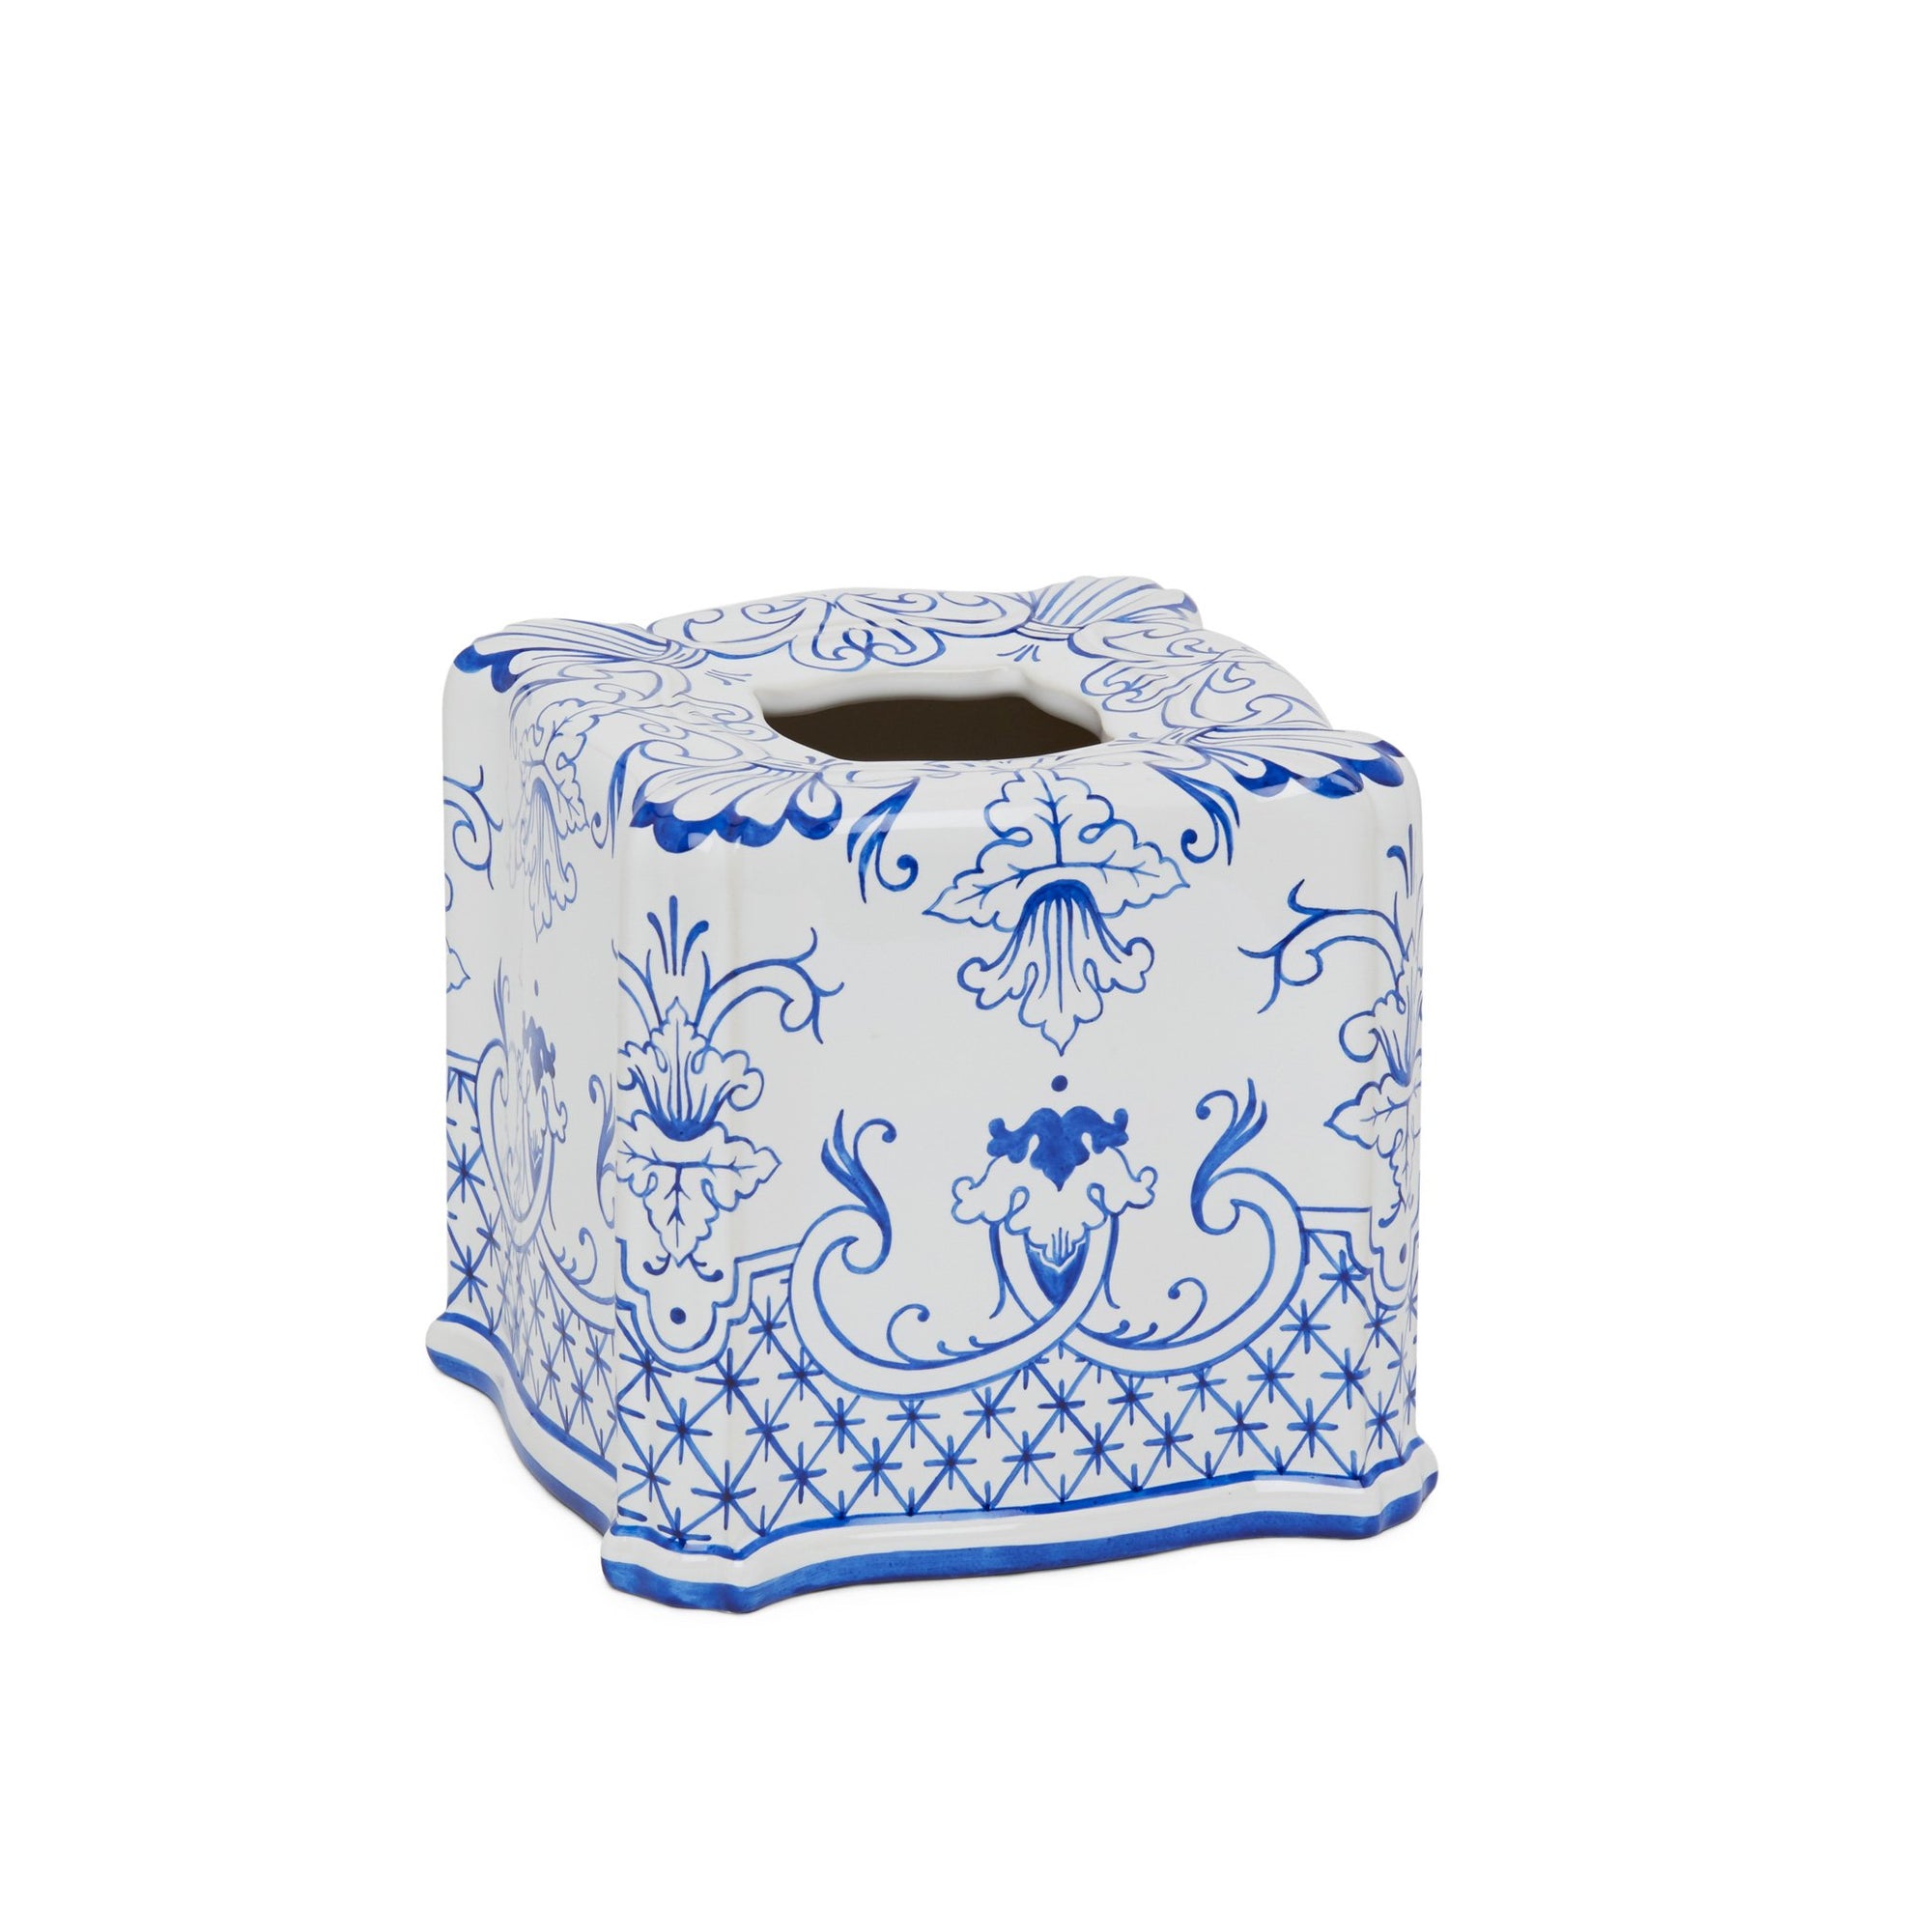 3413B-66DL-WH Sherle Wagner International Ceramic Elongated Tissue Box Cover with Delft on White